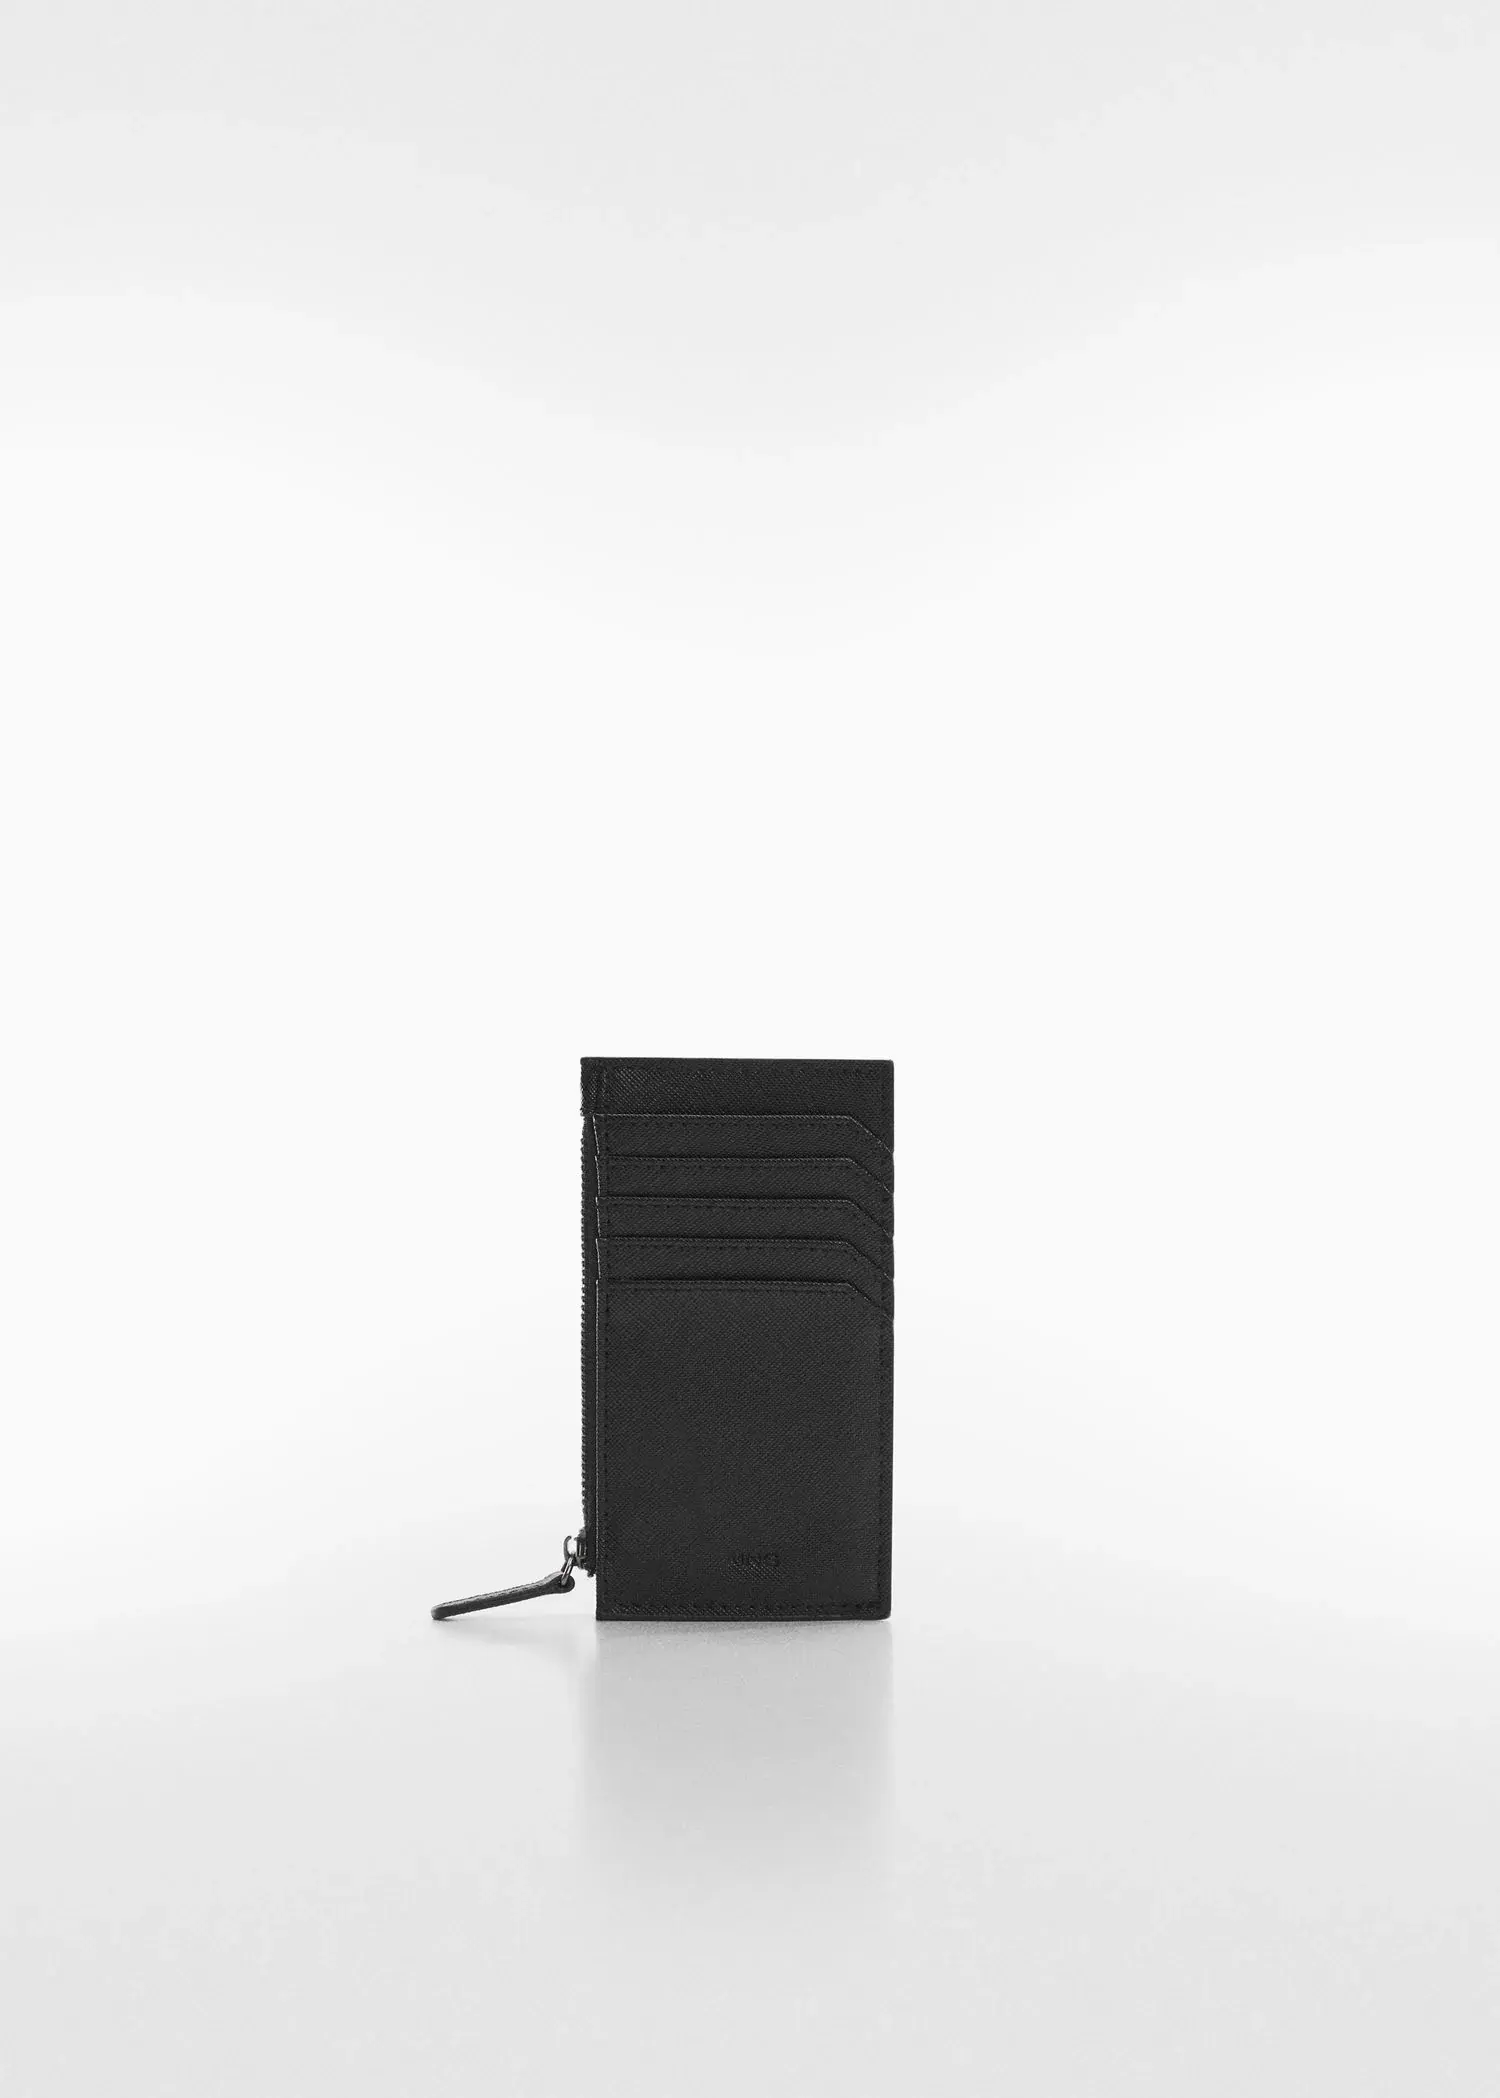 Mango Anti-contactless leather-effect card holder. a black card holder sitting on top of a white table. 